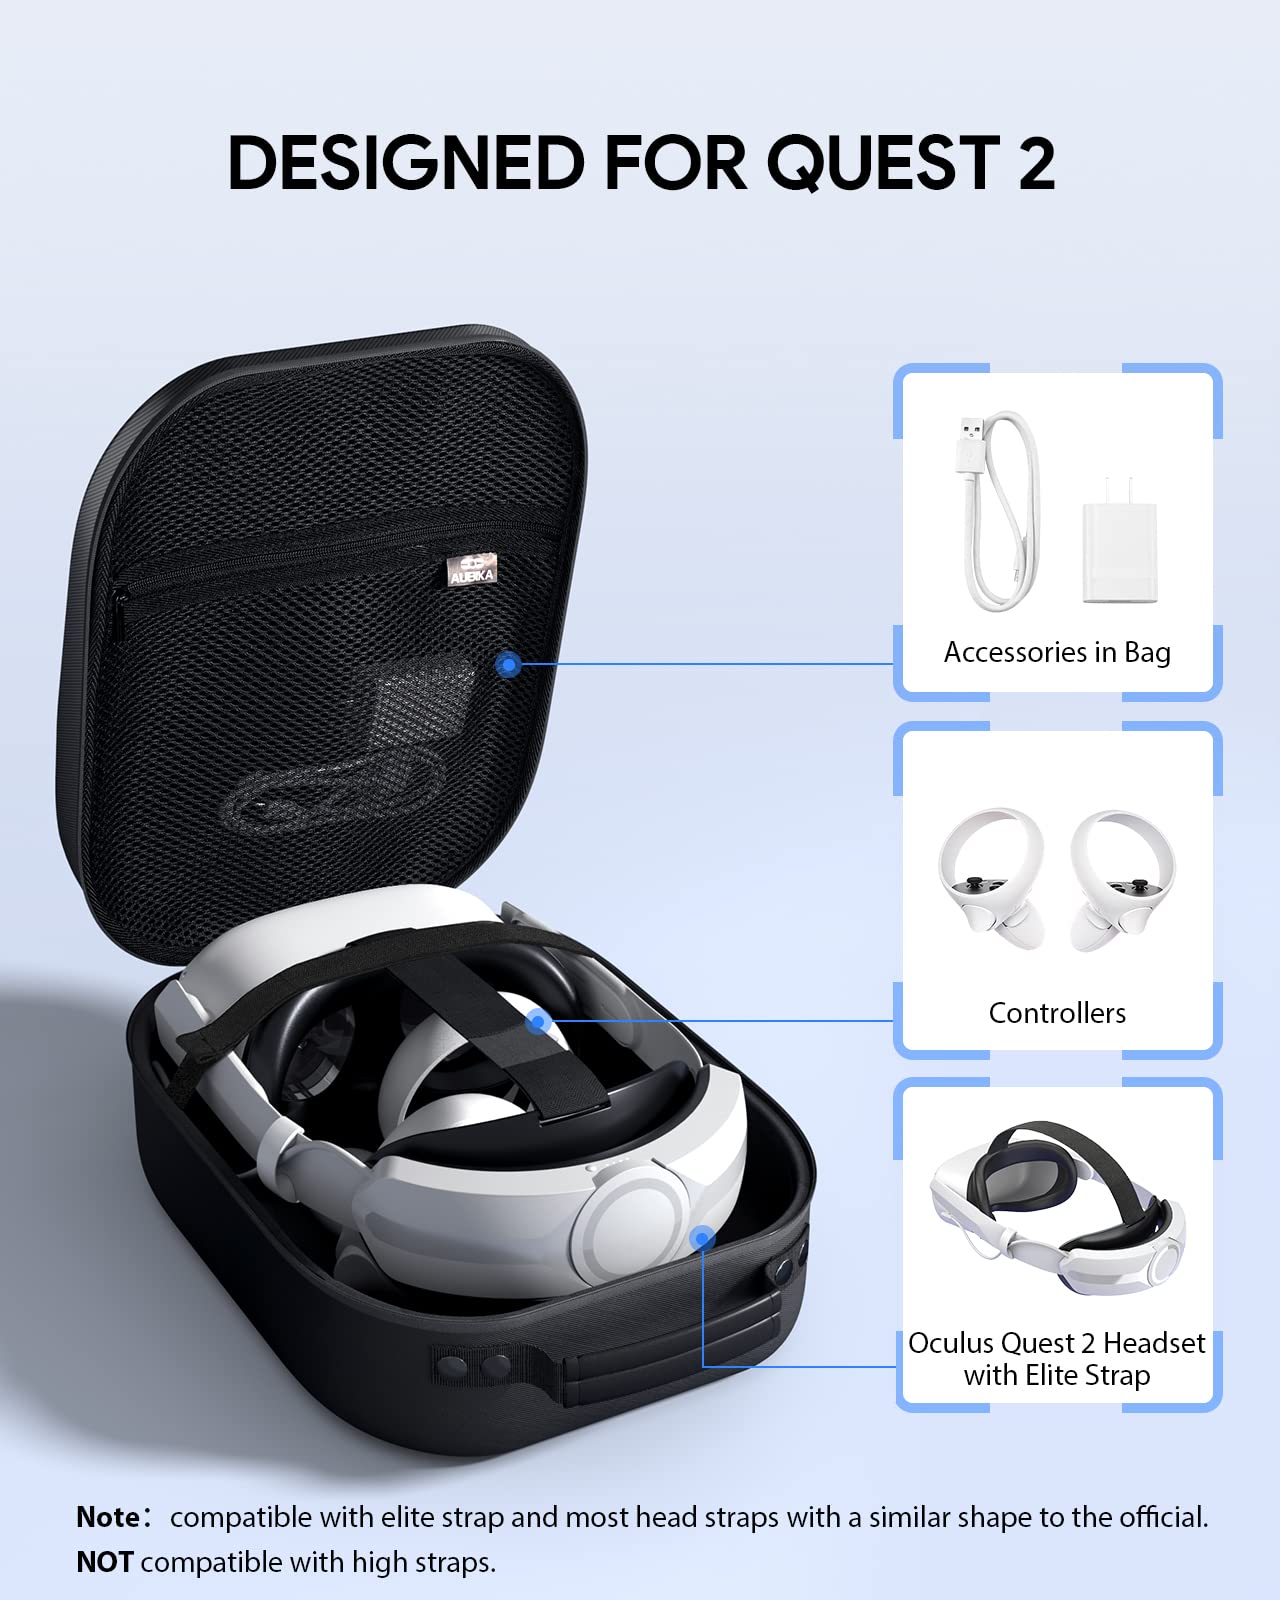 Carrying Case for Meta/Oculus Quest 2/Pico 4, Compatible with Elite/Battery Headset Strap Accessories, Hard Travel Case - Black